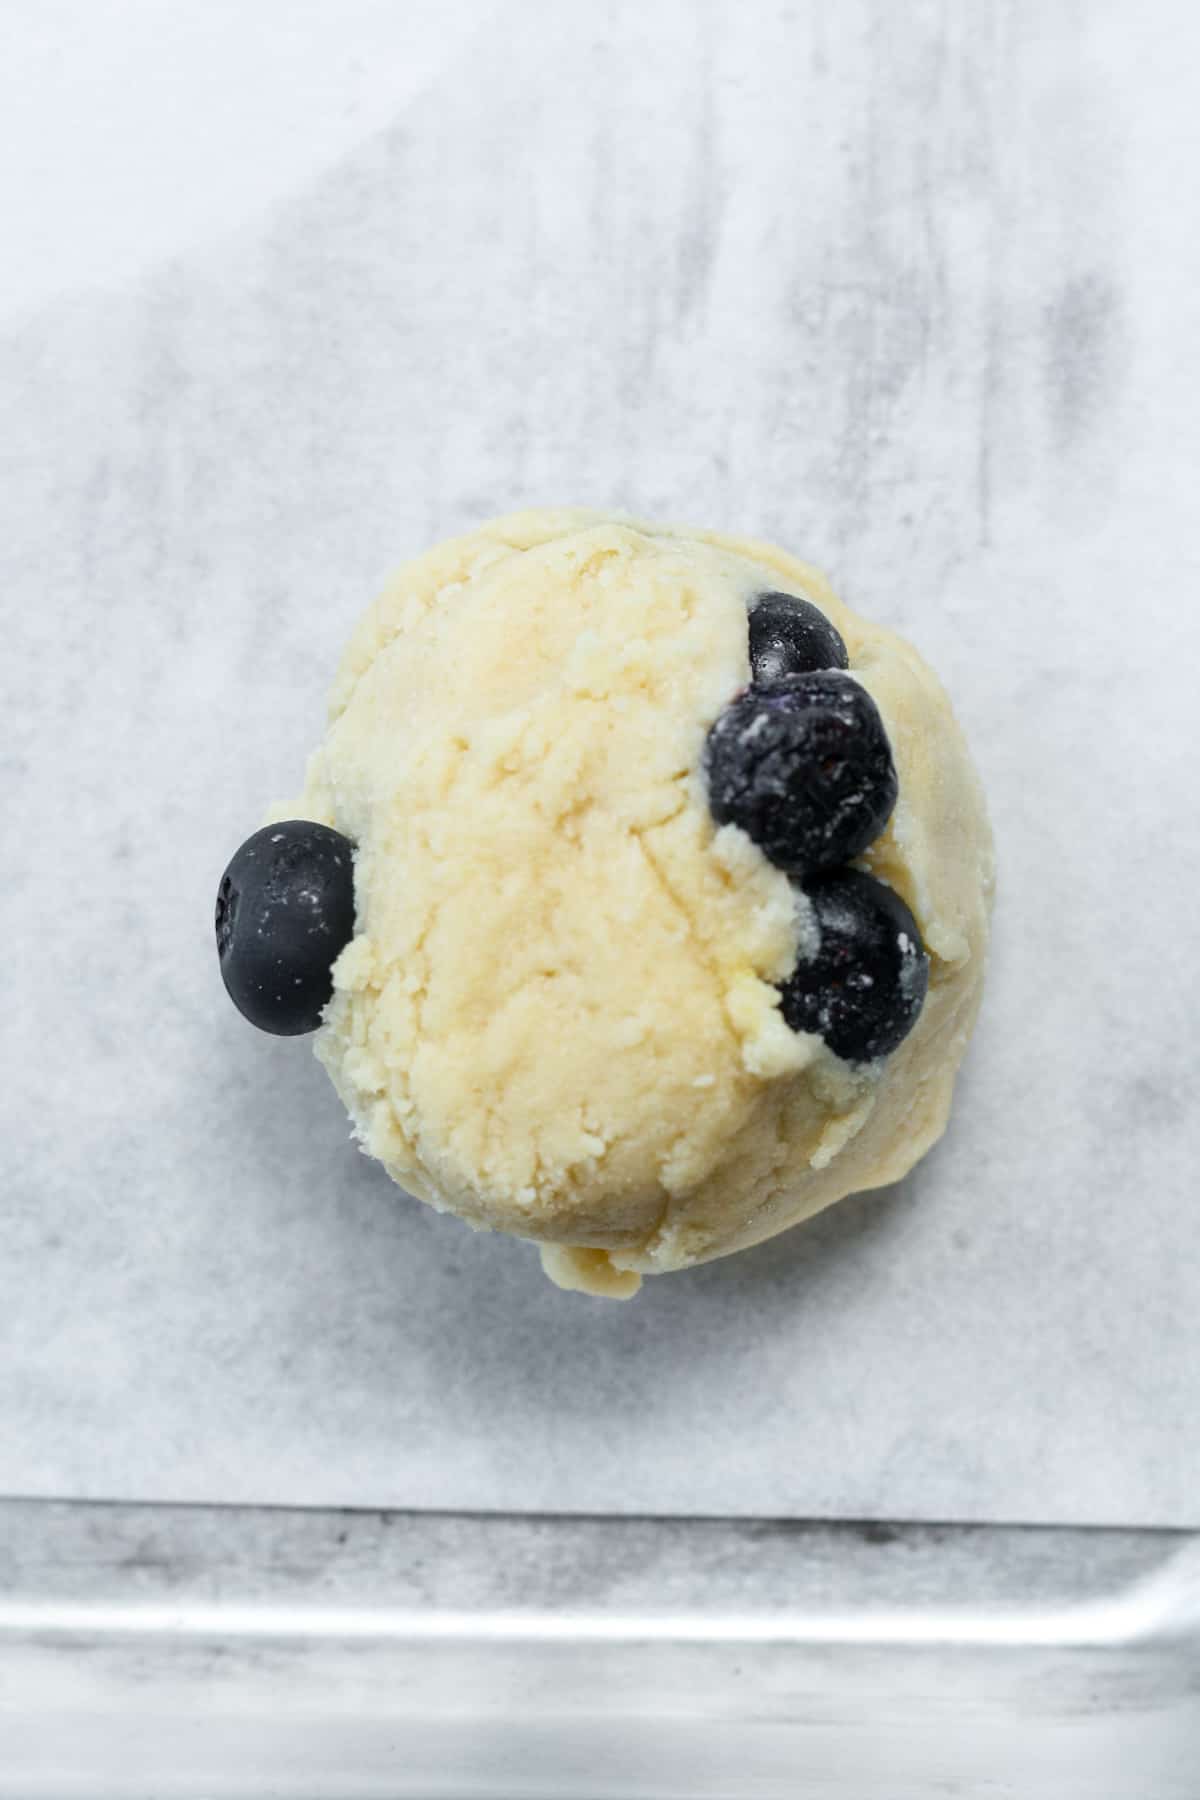 Ball of dough with blueberries